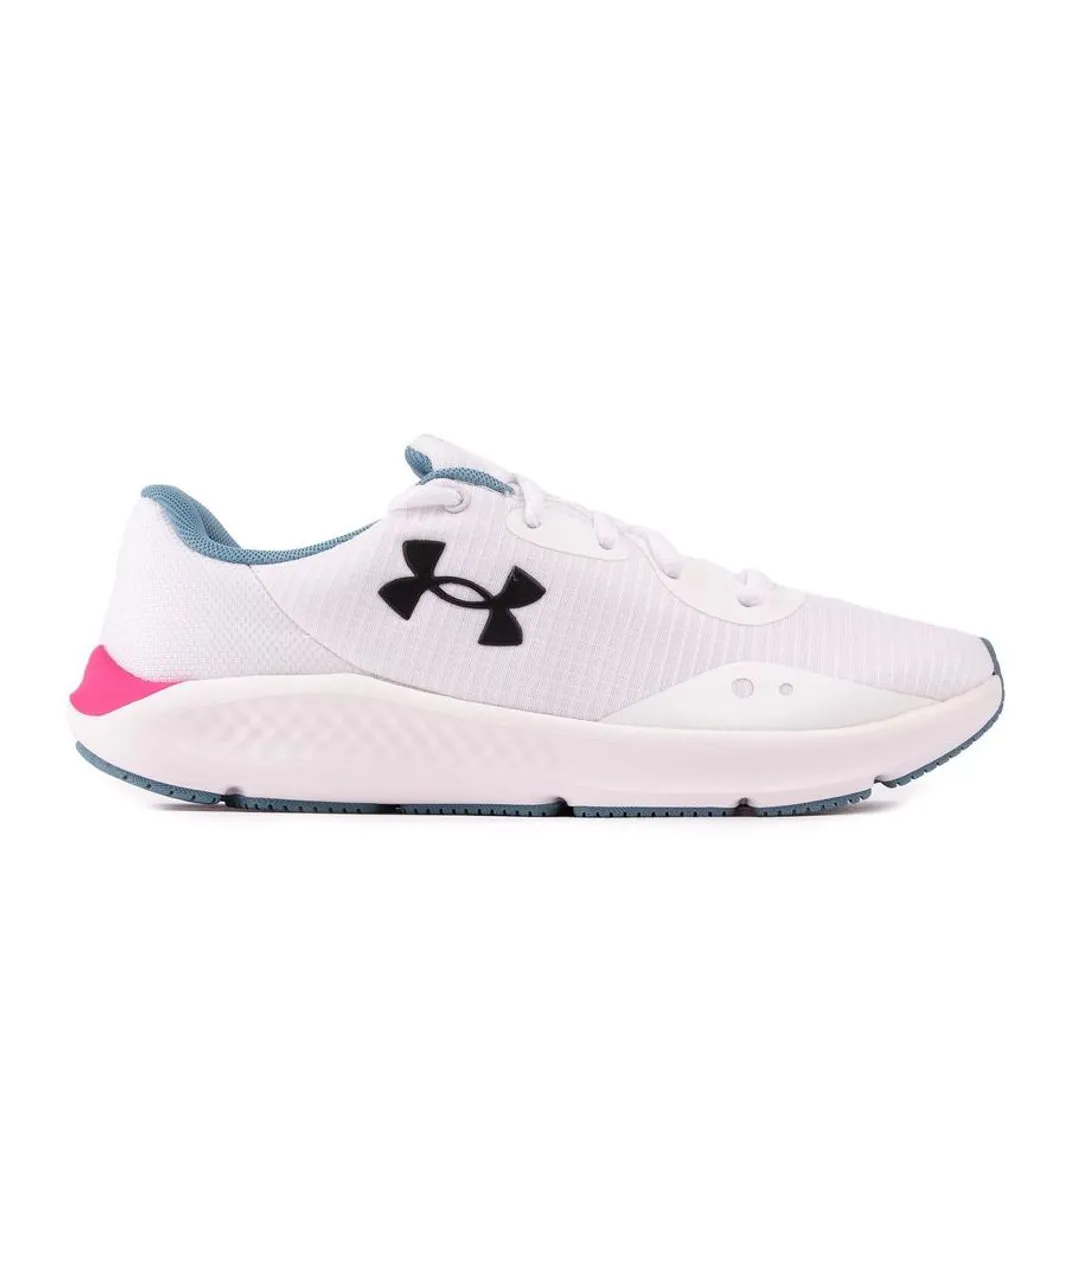 Under Armour Womens Charged Pursuit 3 Tech Trainers - White